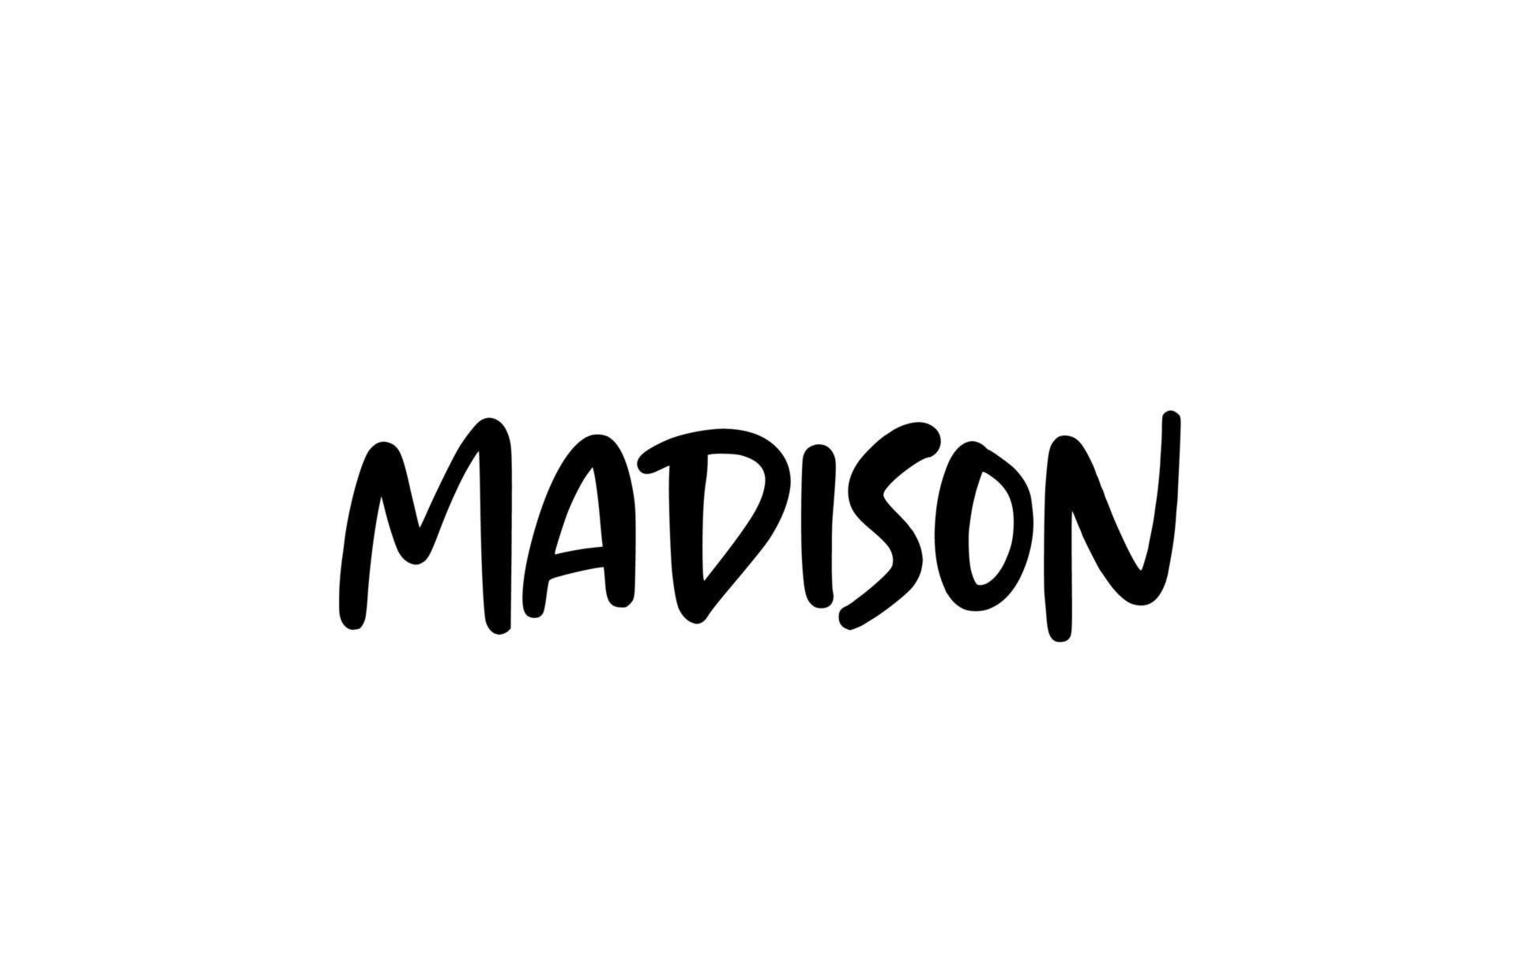 Madison city handwritten typography word text hand lettering. Modern calligraphy text. Black color vector